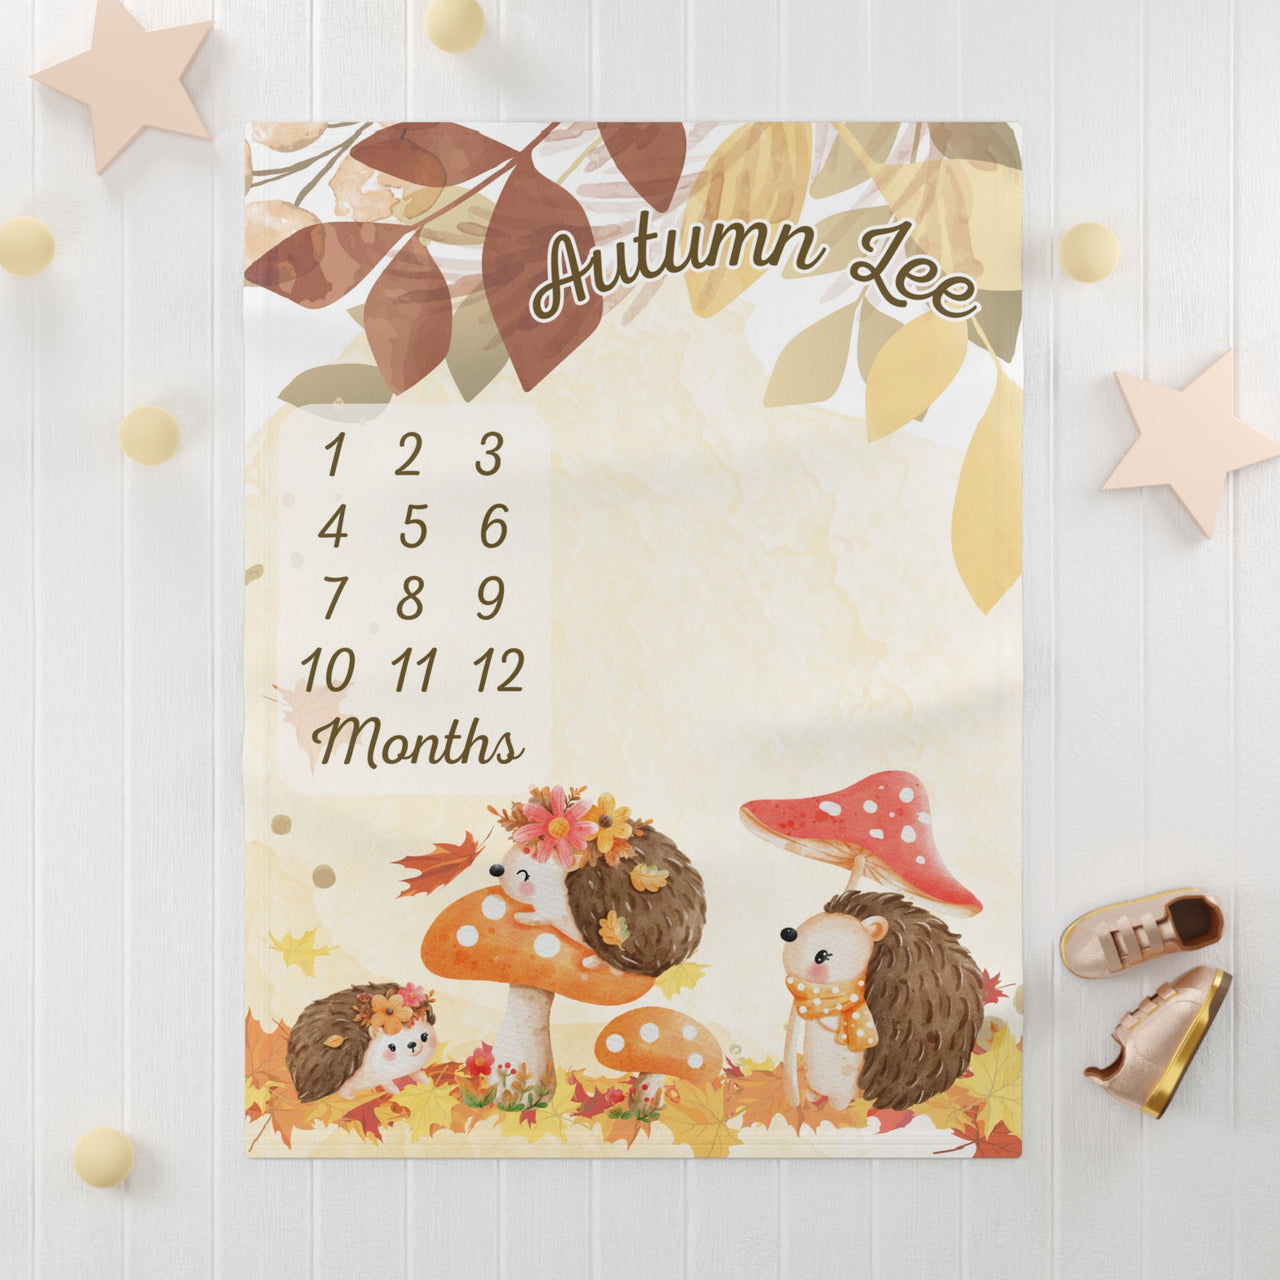 Fall Autumn Hedgehog Soft Fleece Milestone Blanket, Monthly Growth Tracker, Personalized Baby Blanket, Baby Shower Gift, Baby Adventure